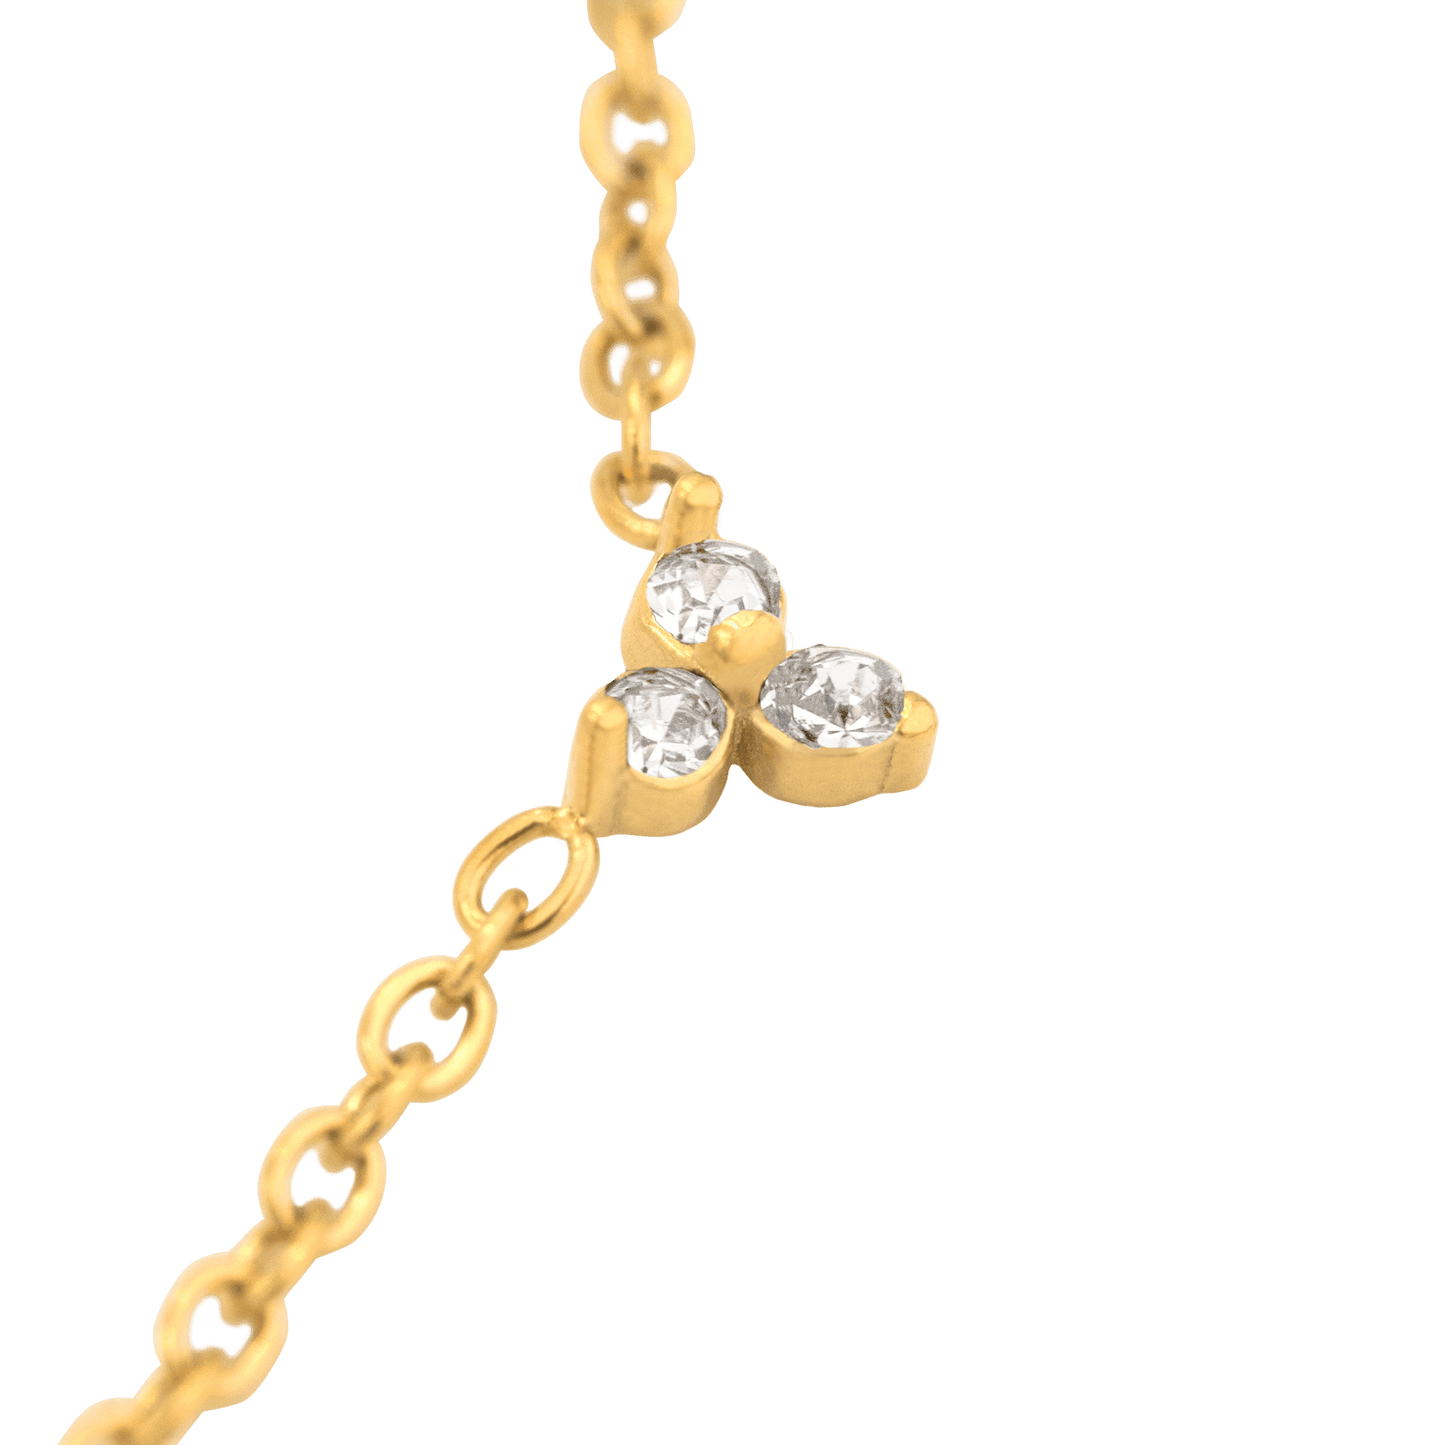 White Stars and Skies Necklace Gold